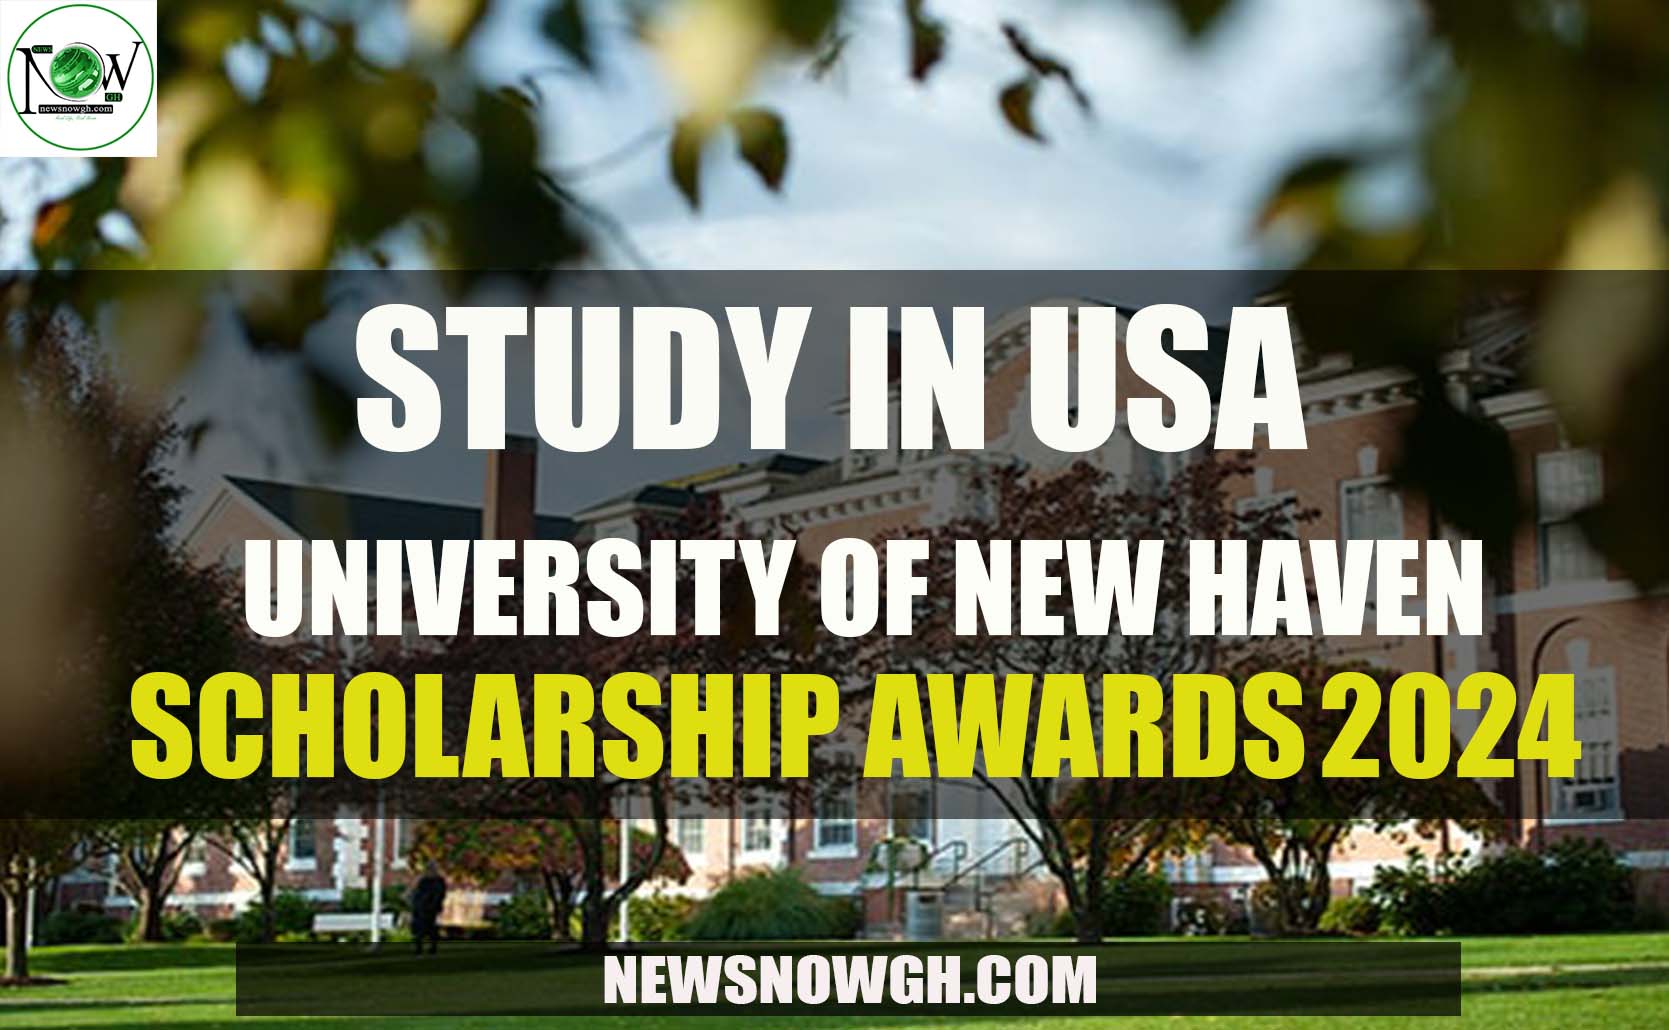 Study In USA University of New Haven Scholarships 2024